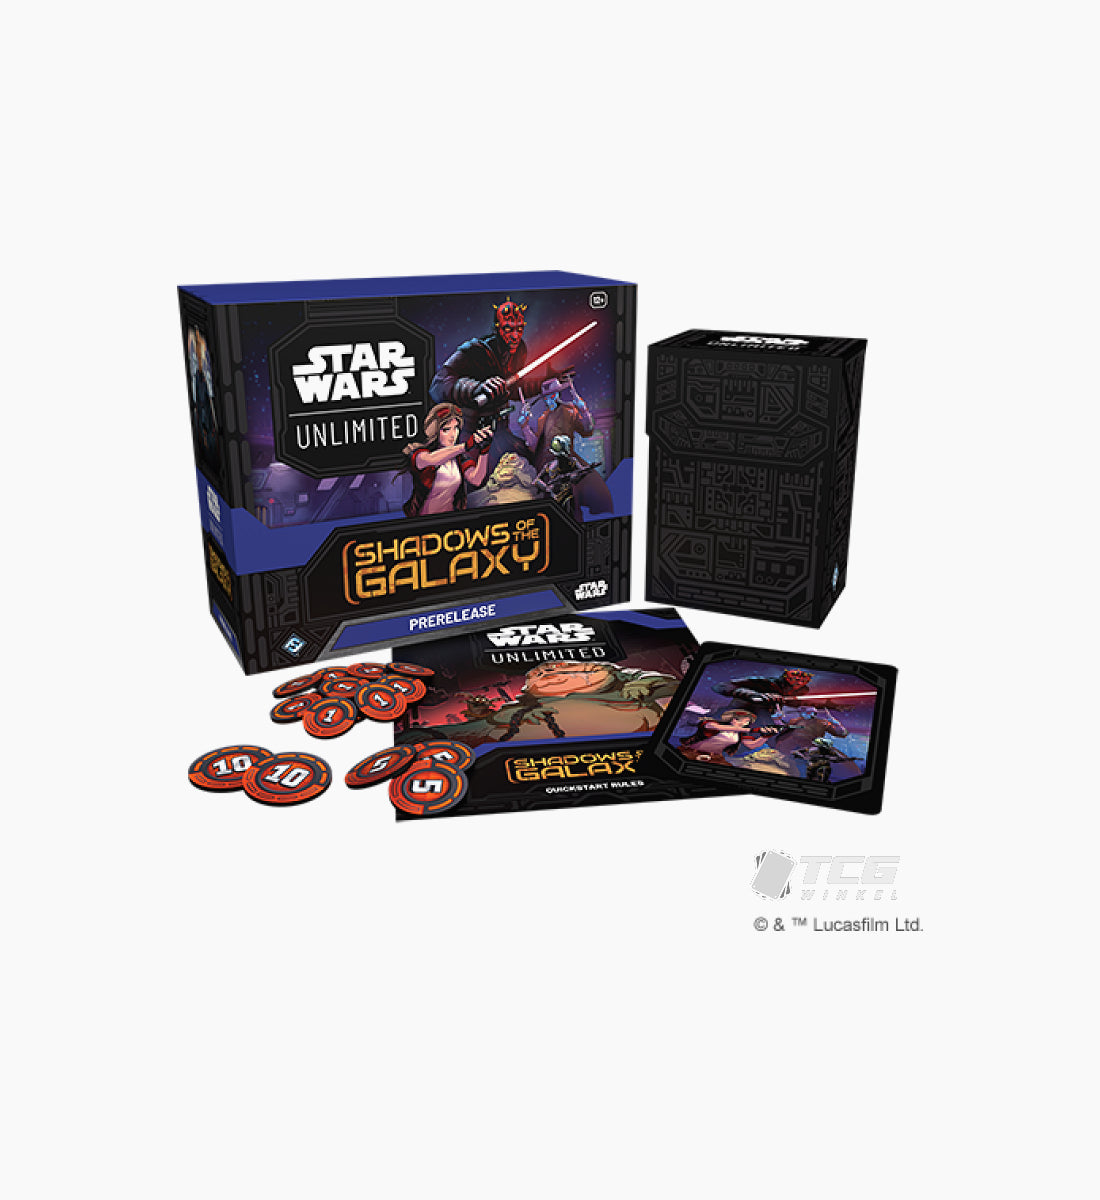 Star Wars Unlimited Shadows of the Galaxy Prerelease Box